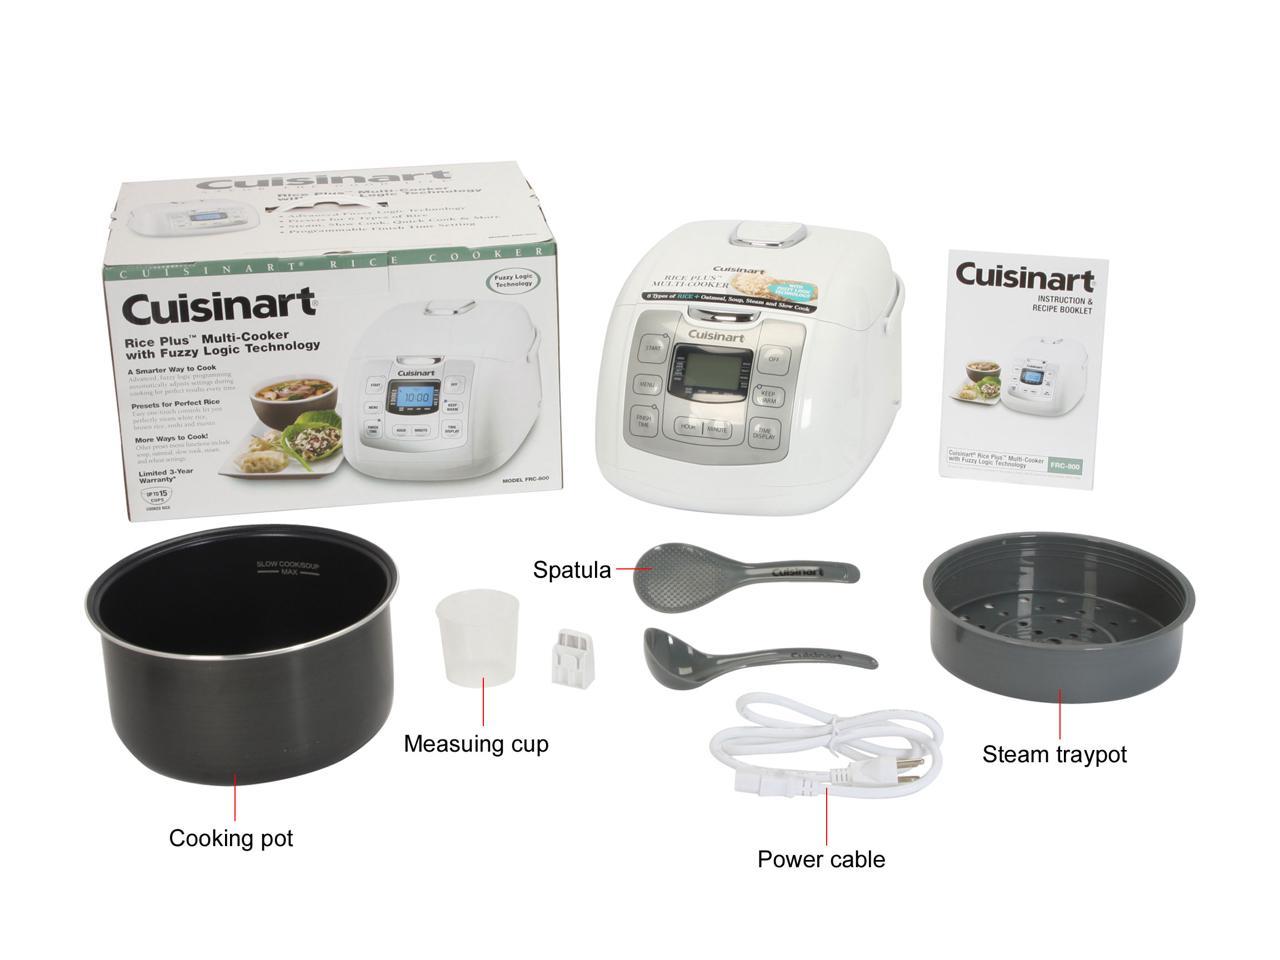 Cuisinart FRC-800 Rice Plus Multi-Cooker with Fuzzy Logic Technology 